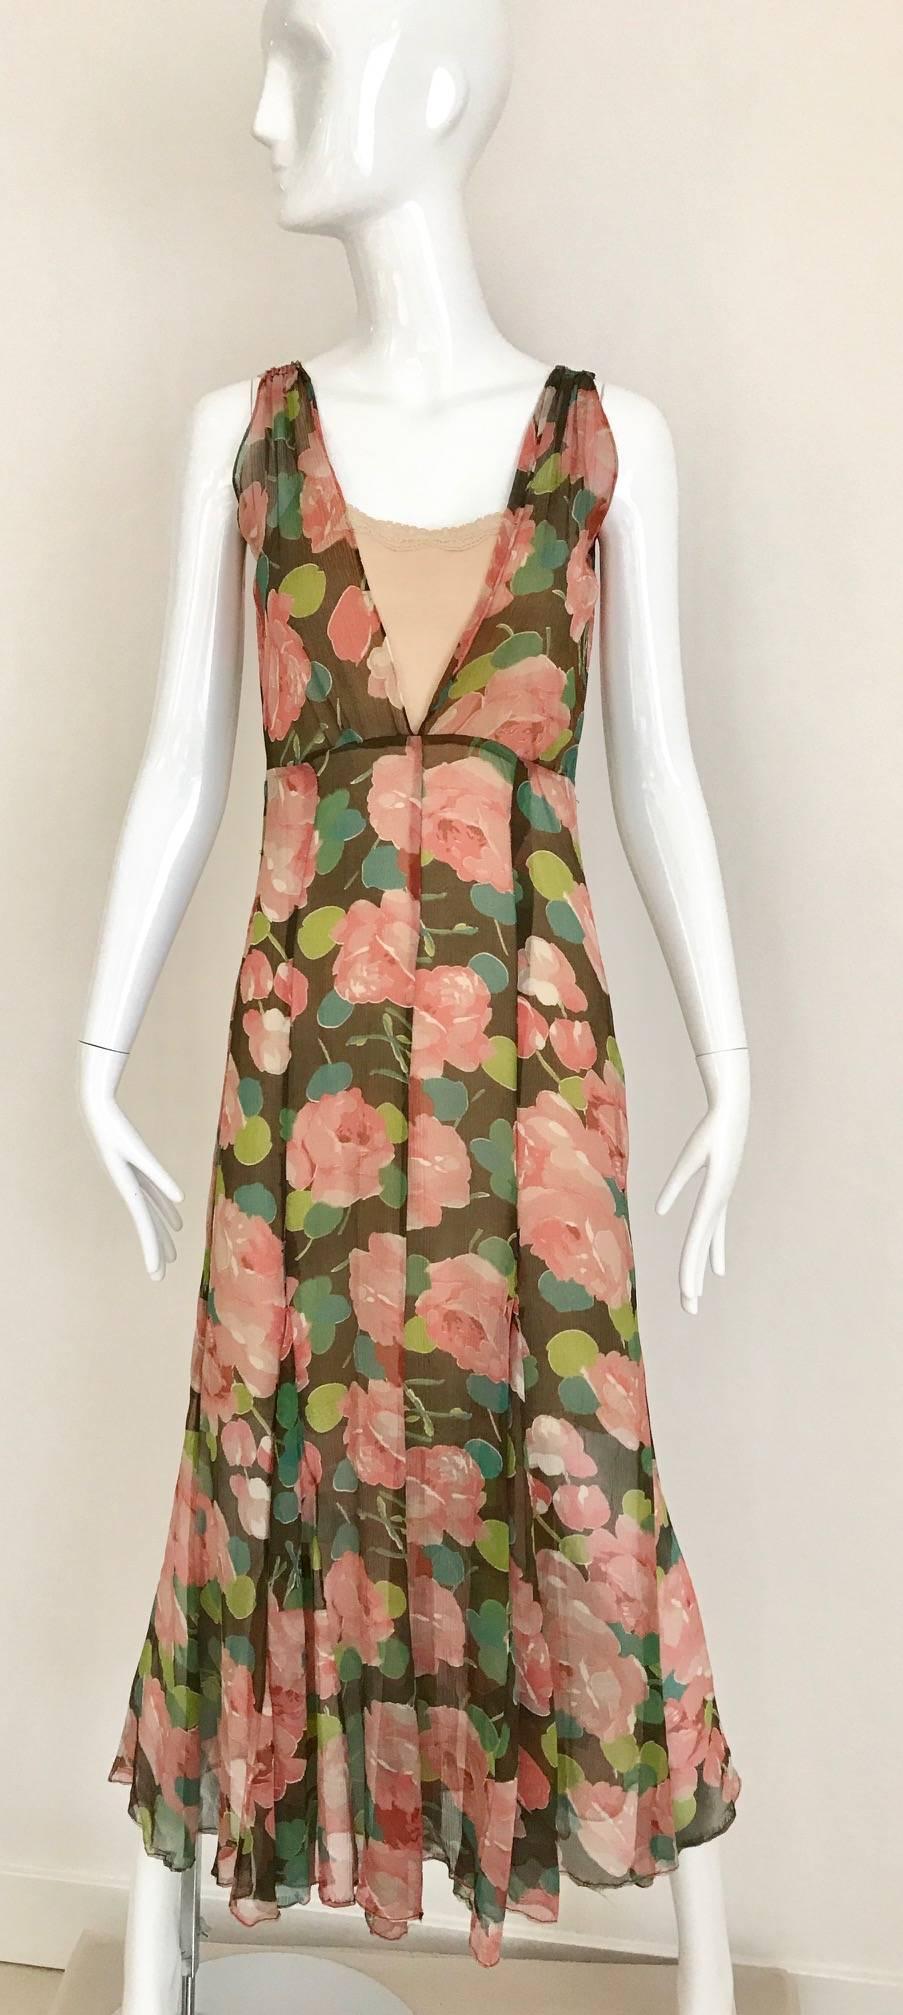 1930s silk floral print in peach,chartreuse green and teal Silk day dress. This dress can be worn both way see image#4
Image#2 dress is worn with slip. 
Best fit size 2/4. Shoulder should be no more than 15 inch
Bust: 34 inches/ Waist: 28 inches/